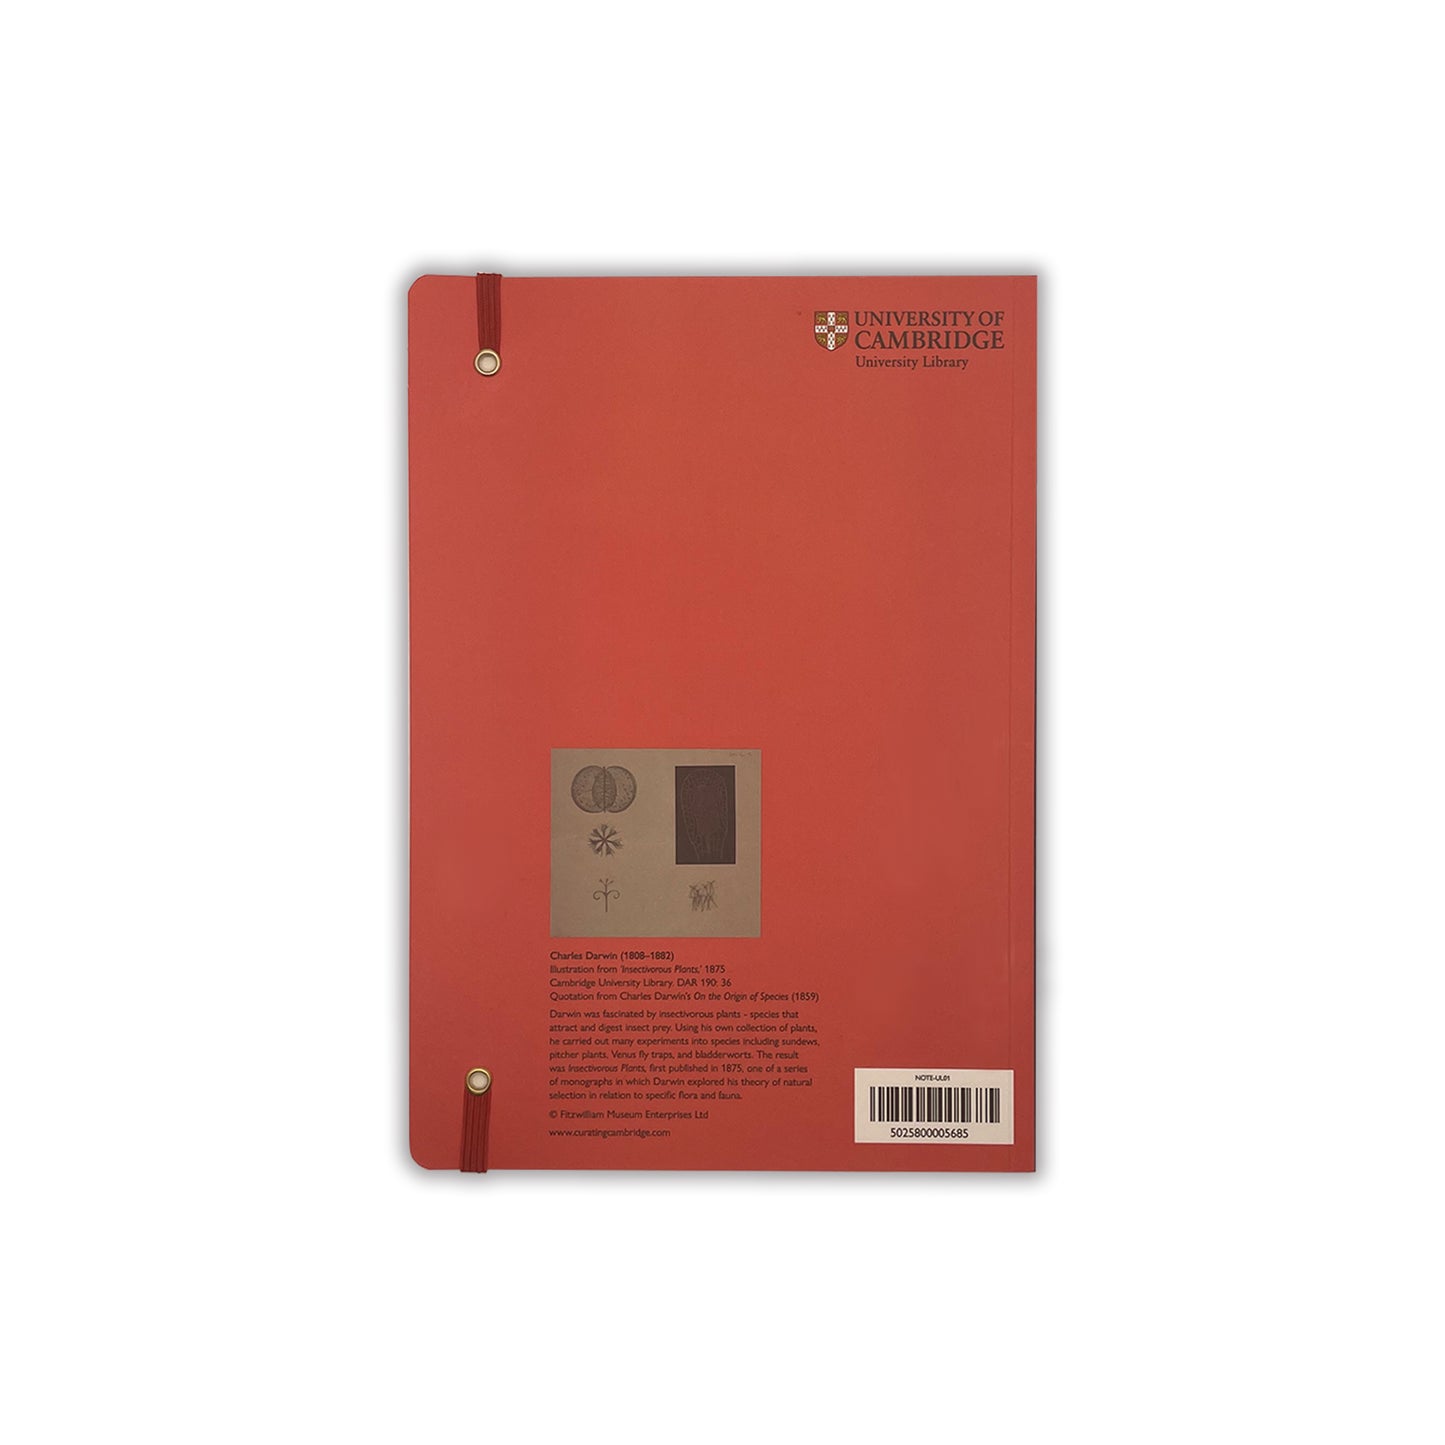 A5 journal - back cover. Coral background with Cambridge University Library logo. 